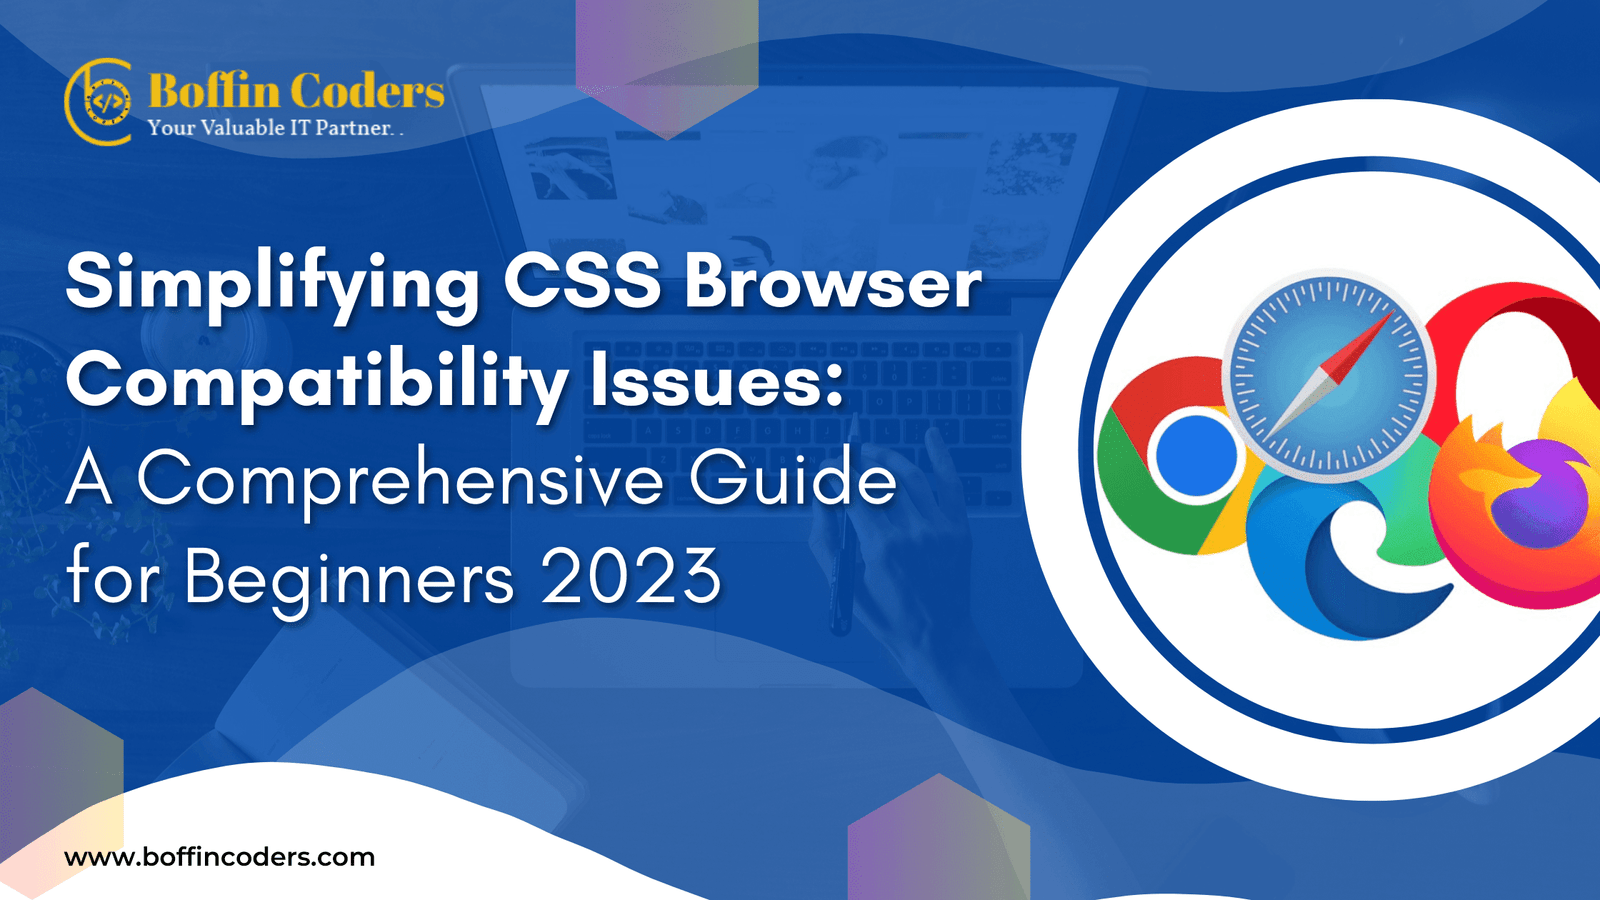 Simplifying CSS Browser Compatibility Issues: A Comprehensive Guide for Beginners 2023